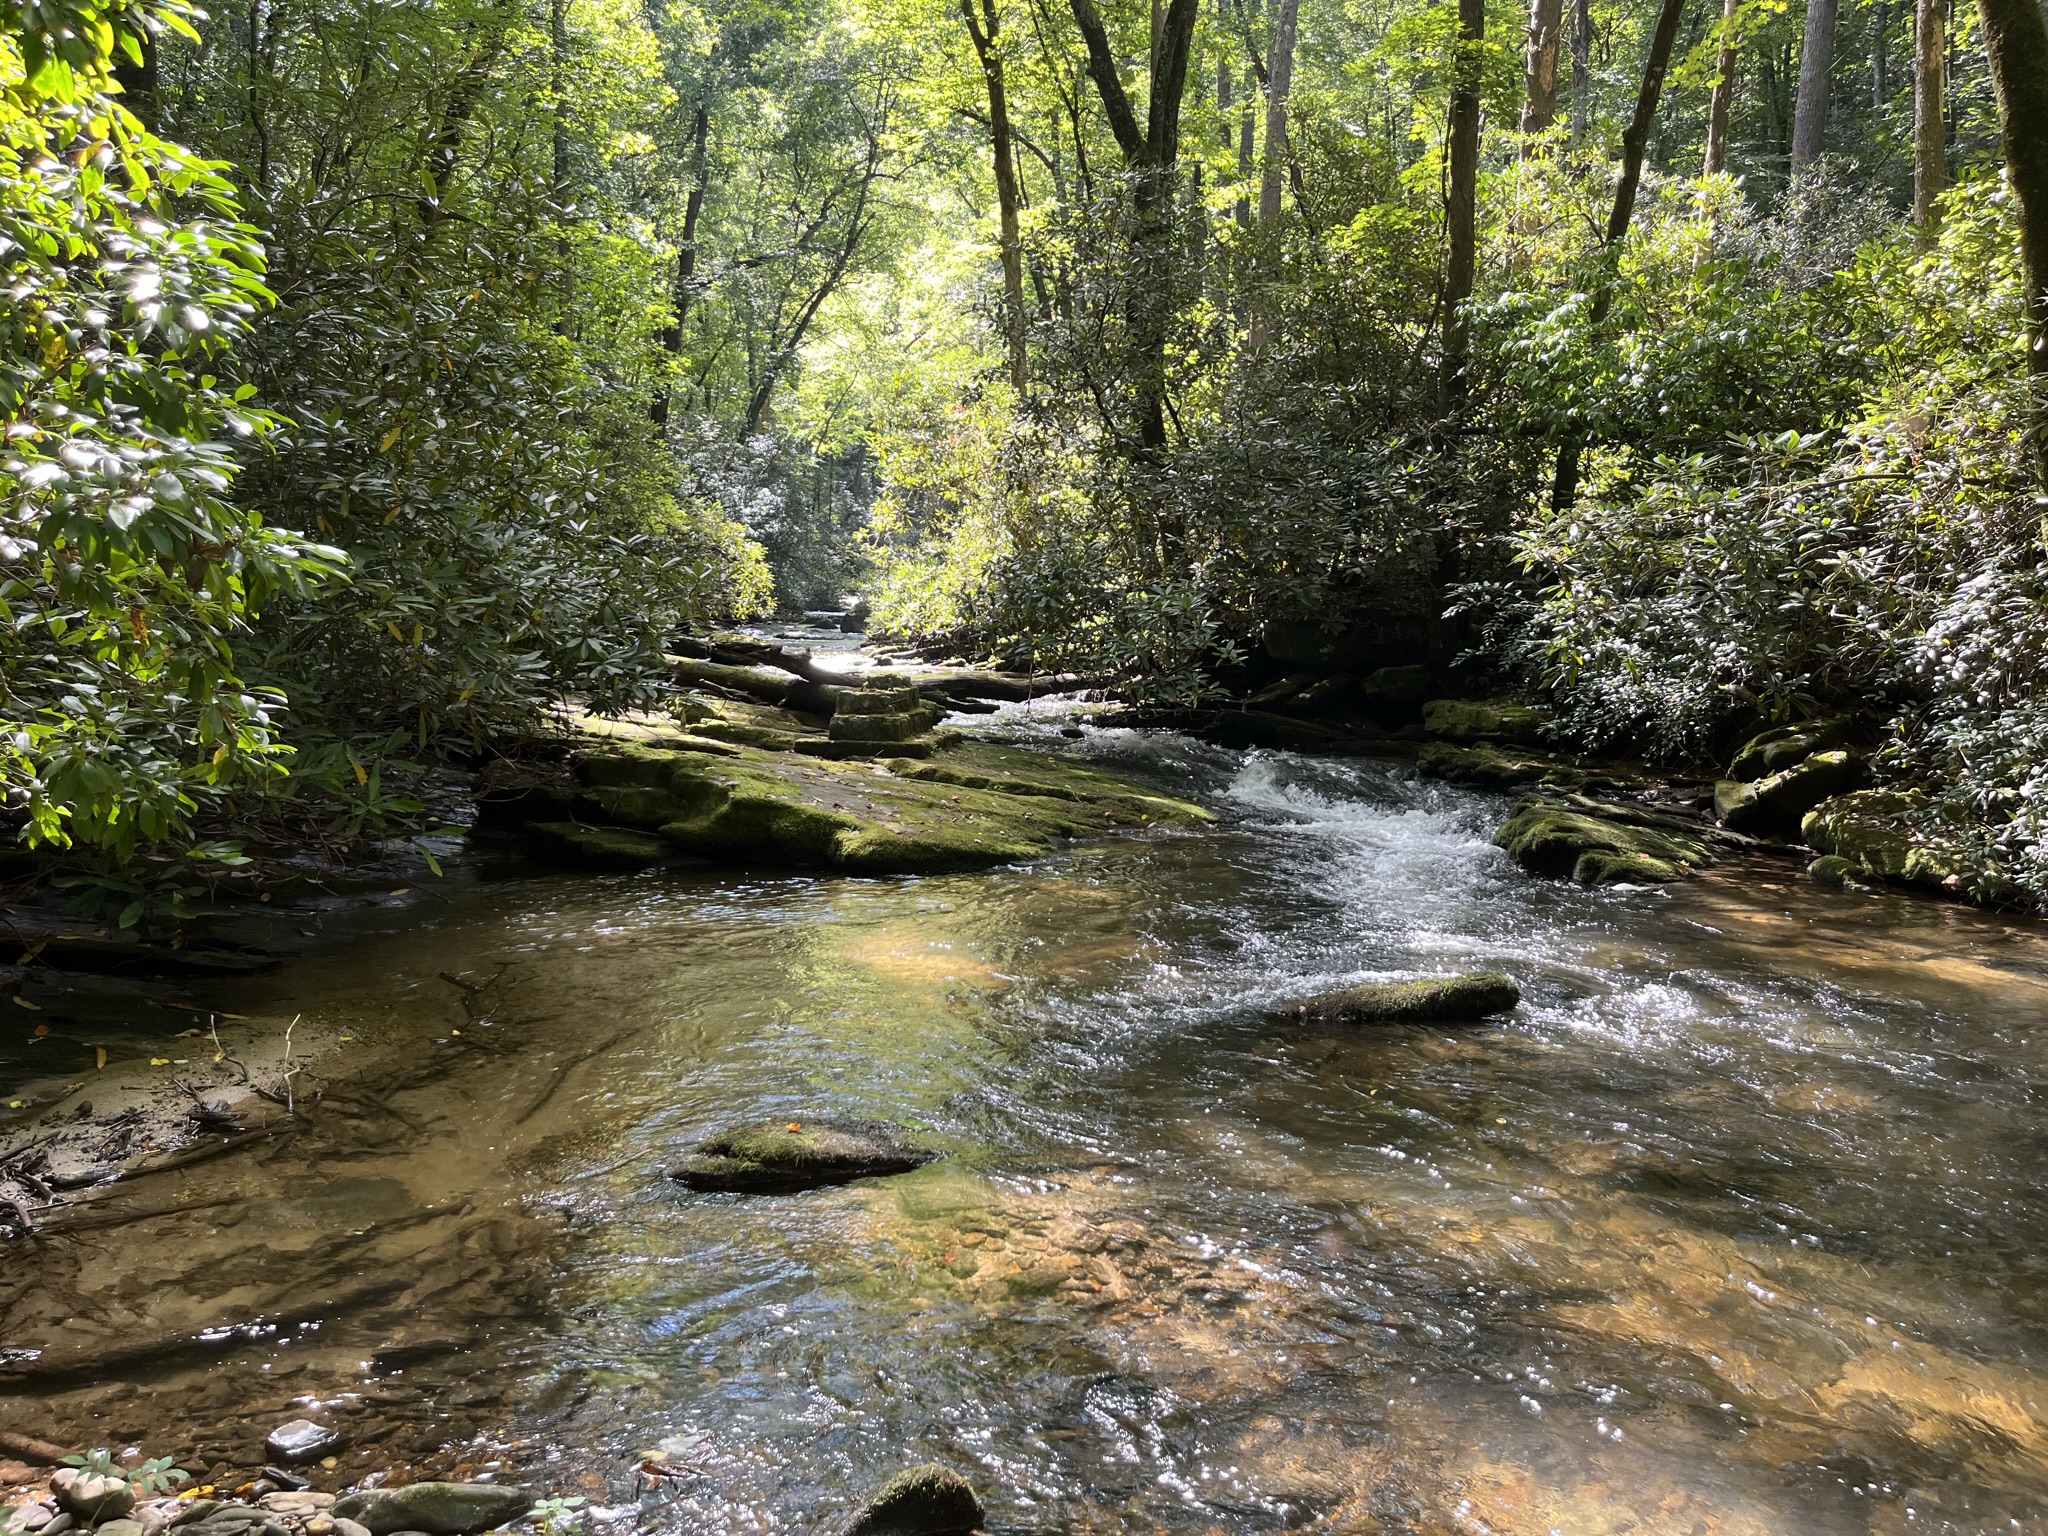 Along the east fork of the Chattooga River